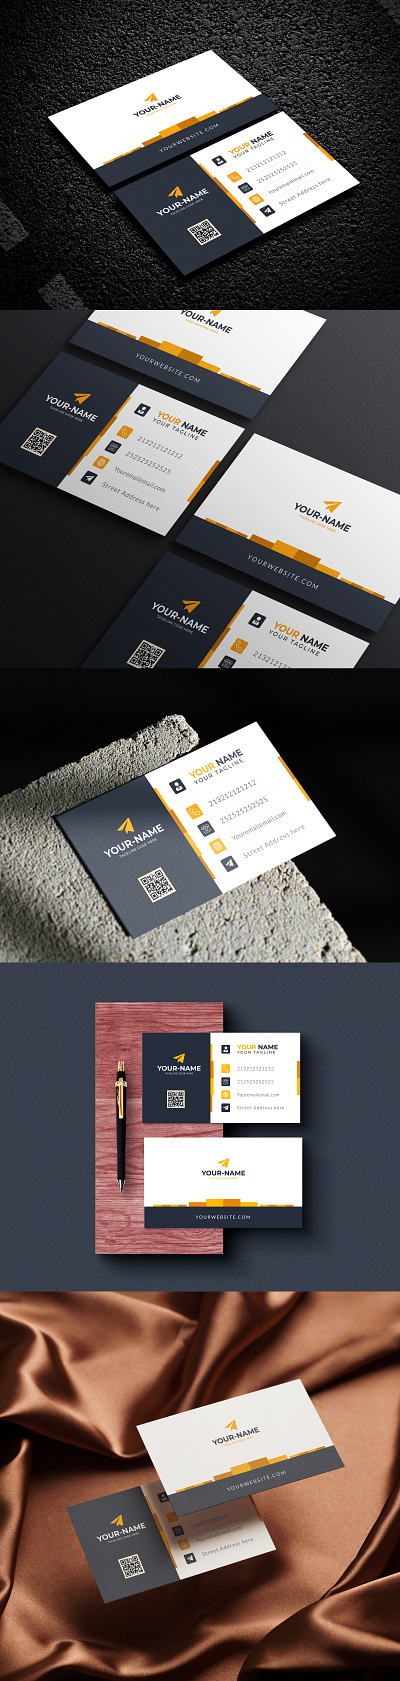 Modern Corporate Business Card Design branding business card card design corporate business card graphic design modern visiting card office card smart id card visiting card